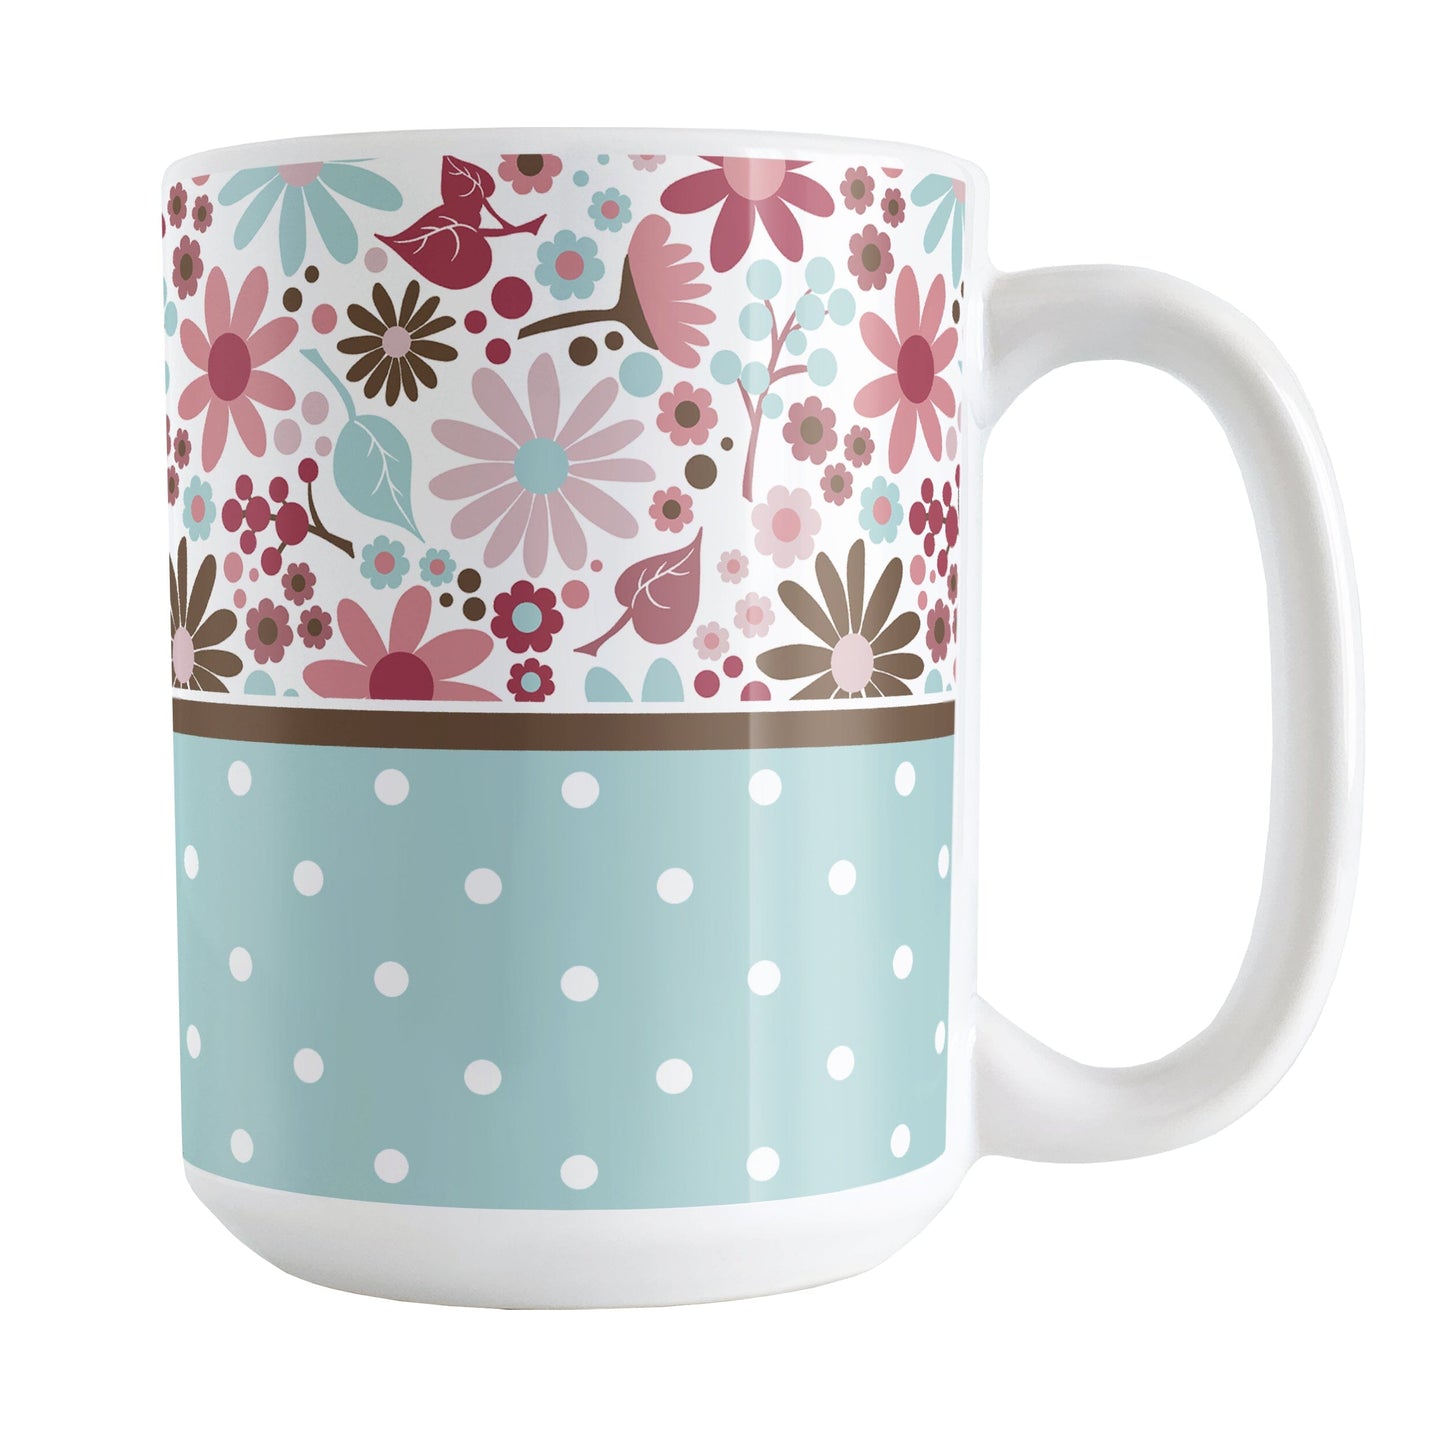 Berry Blue Summer Flowers Polka Dot Mug (15oz) at Amy's Coffee Mugs. A ceramic coffee mug designed with a pretty floral pattern in a gorgeous berry pink color palette, with light blue and brown along the top, and a light blue polka dot pattern along the bottom. These patterns wrap around the mug to the handle.